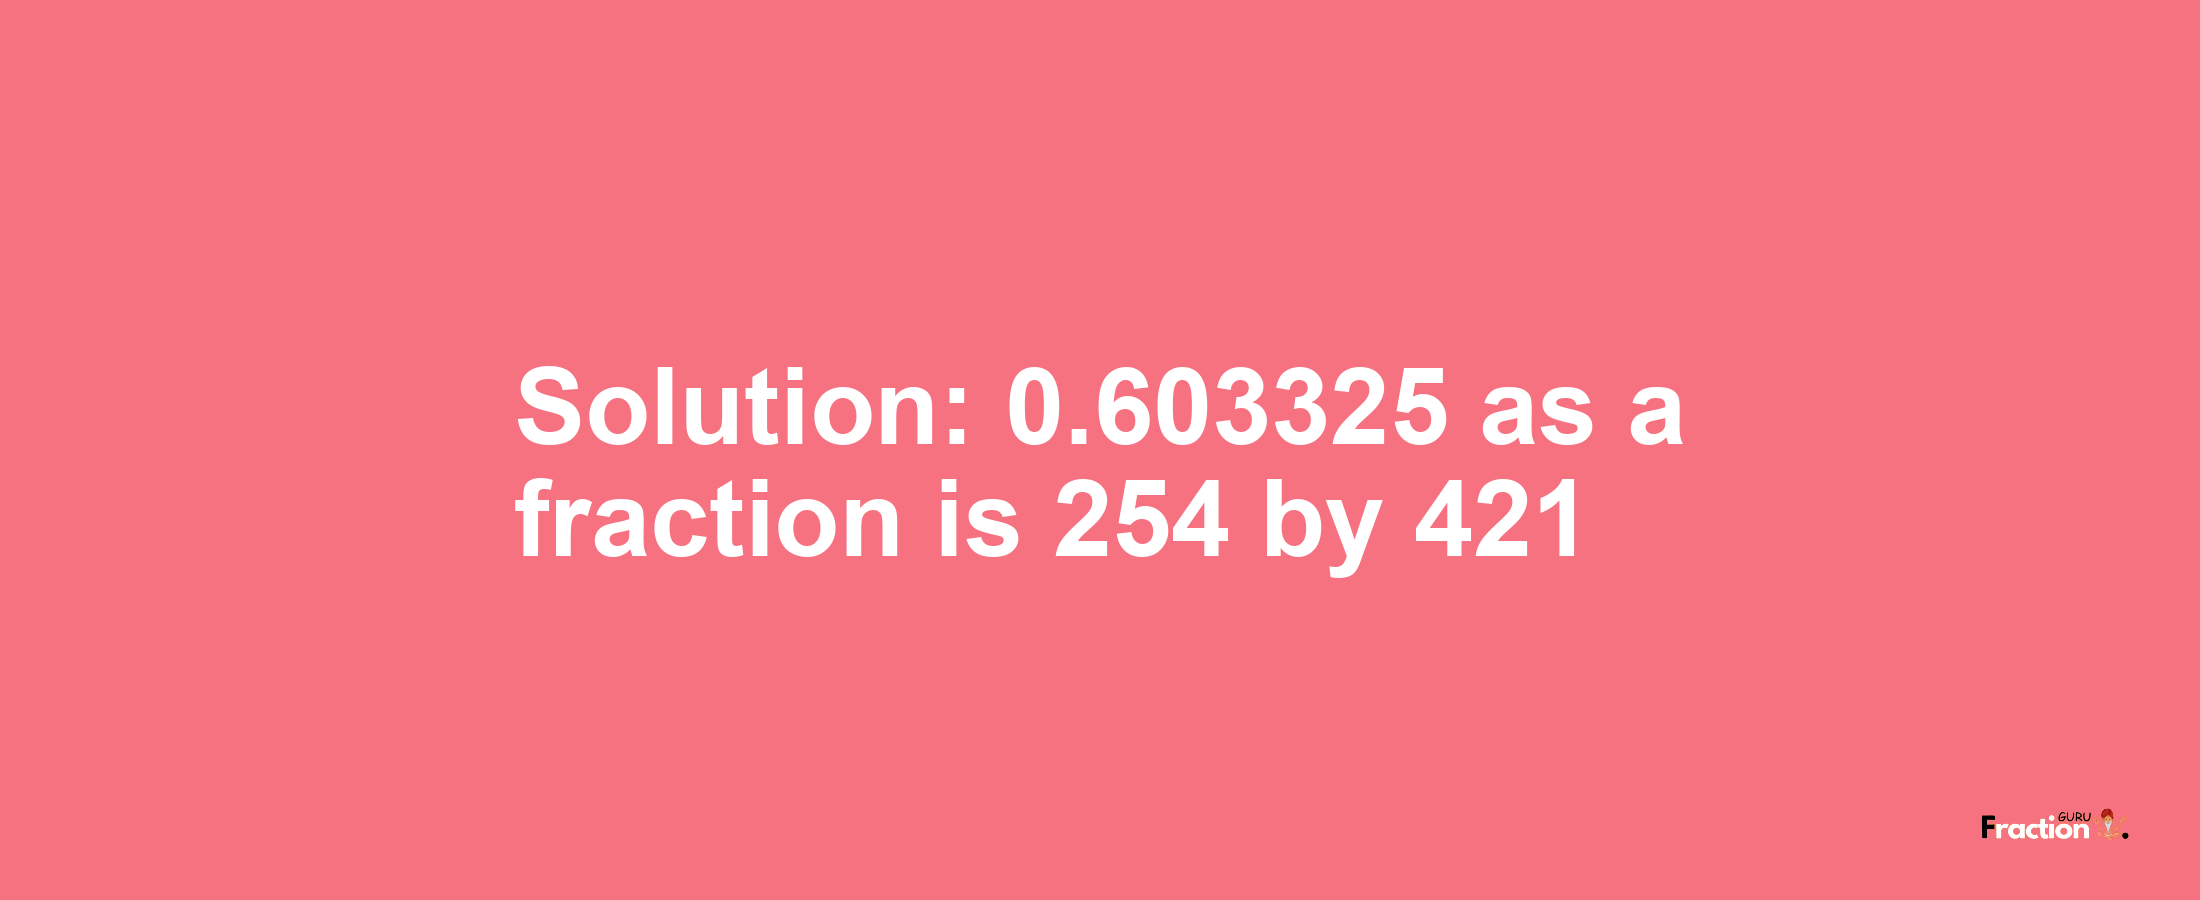 Solution:0.603325 as a fraction is 254/421